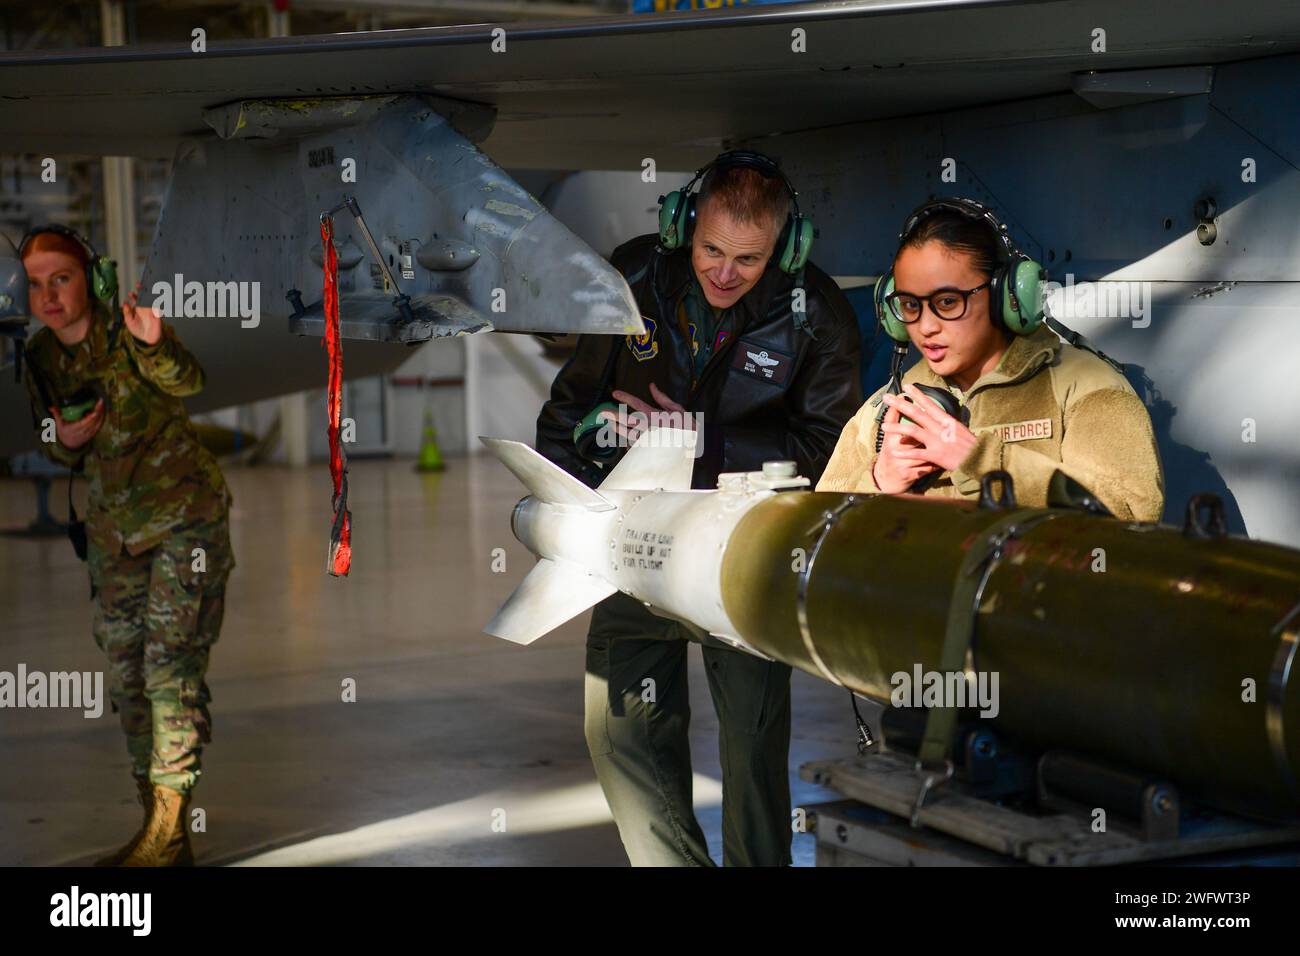 U.S. Air Force Maj. Gen. Derek France, Third Air Force commander, receives instruction from Staff Sgt. Nicole Almario, a maintainer assigned to the 31st Maintenance Squadron, right, on the process of loading munitions, at Aviano Air Base, Italy, Jan. 23, 2024. Responsible for 10 wings with more than 32,000 Airmen across two continents, the Third Air Force plans, executes and assesses a full spectrum of airpower operations across Europe and Africa. Stock Photo